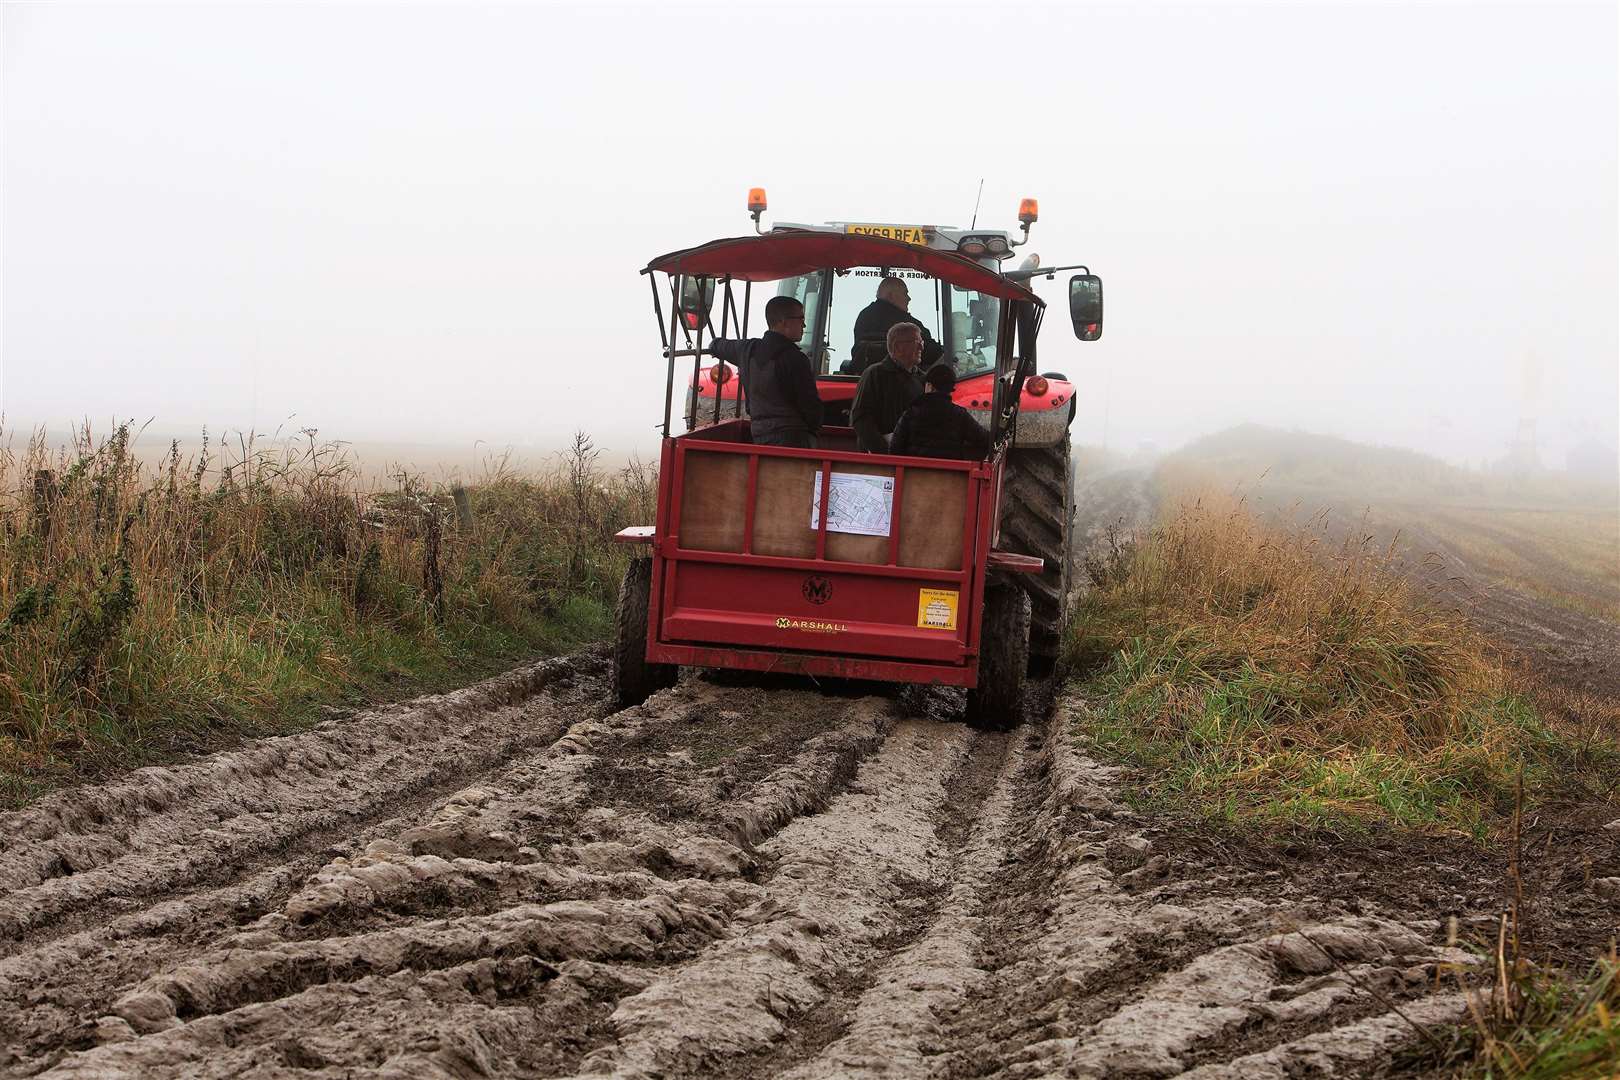 The tractor and trailer transport which toured the fields was the only way for spectators to avoid the mud, although the fog meant their view of the competitors was limited. Photo: Robert MacDonald/Northern Studios